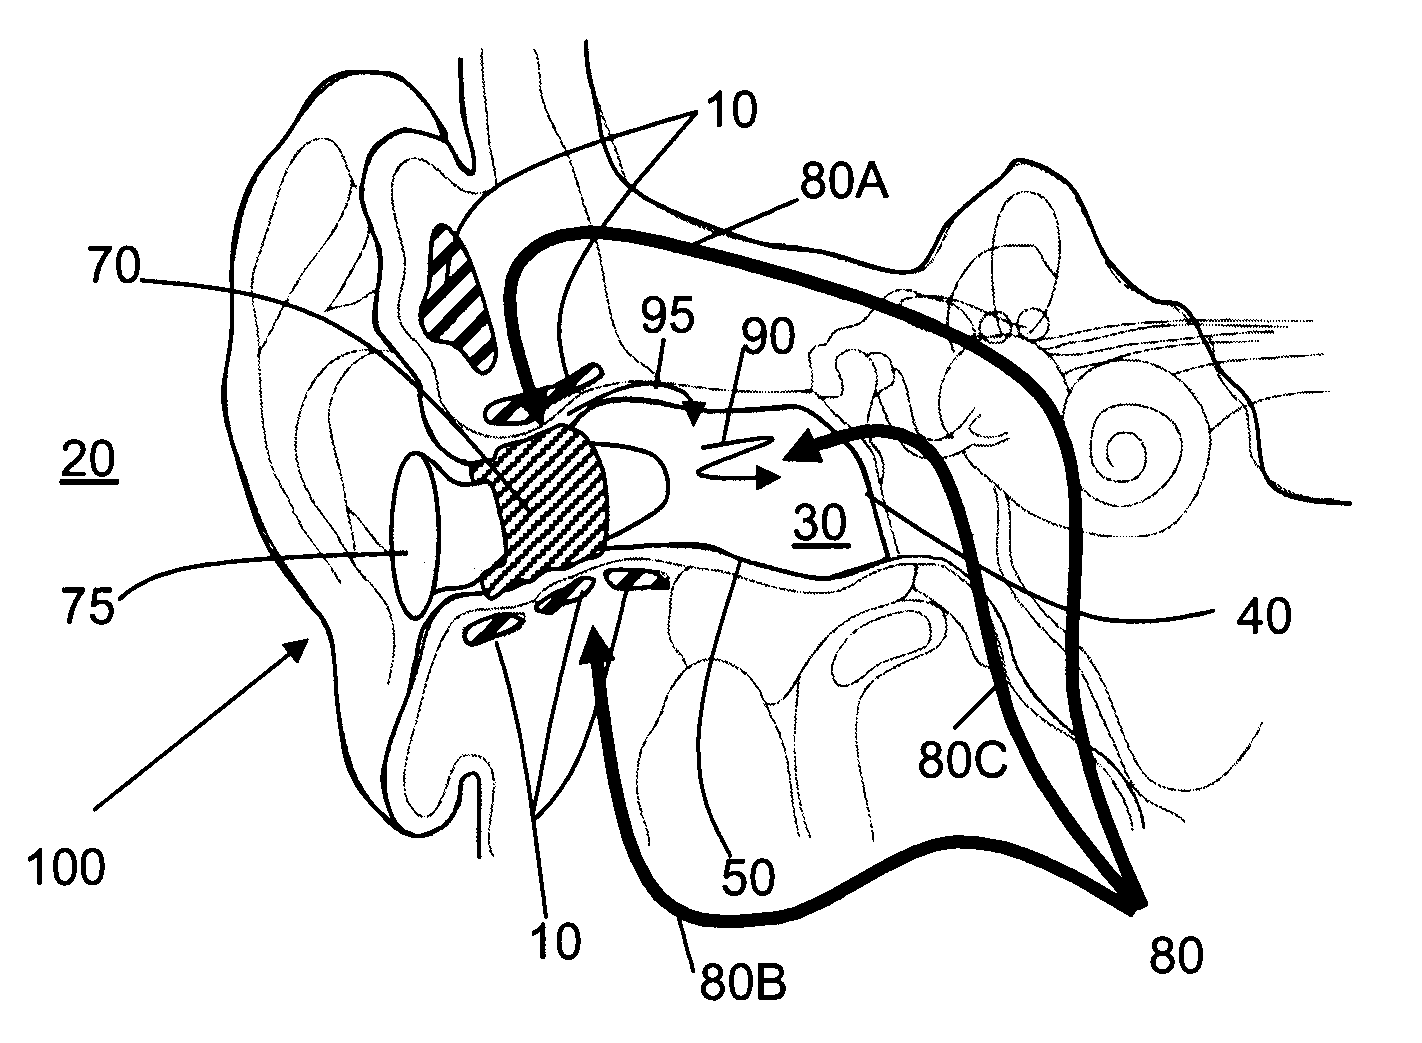 Pressure regulating systems for expandable insertion devices